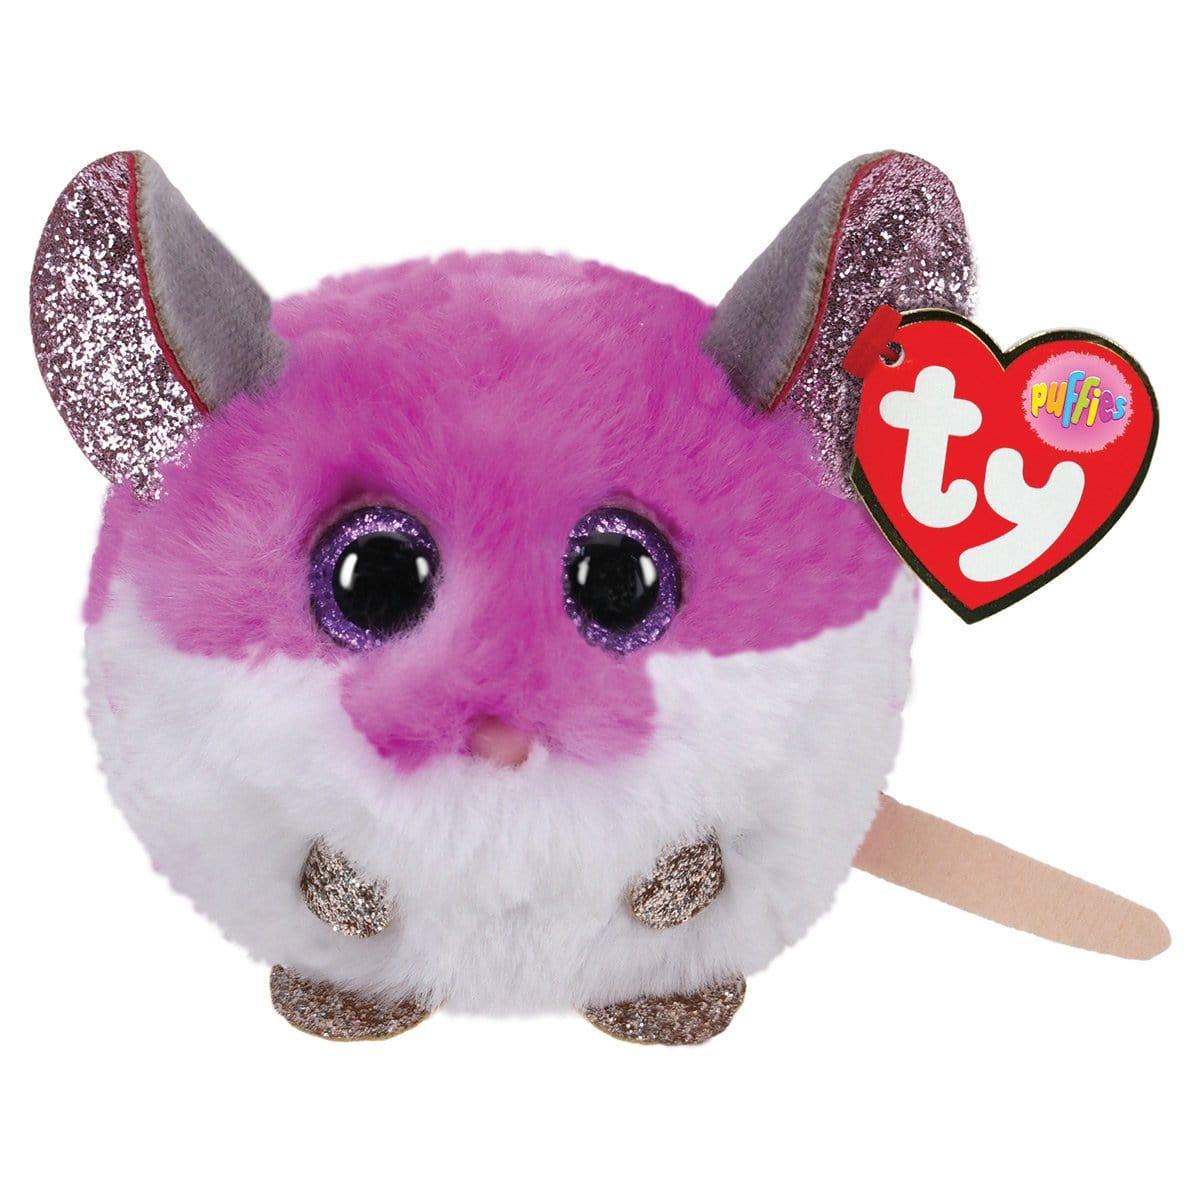 Buy Plushes Puffies - Colby sold at Party Expert